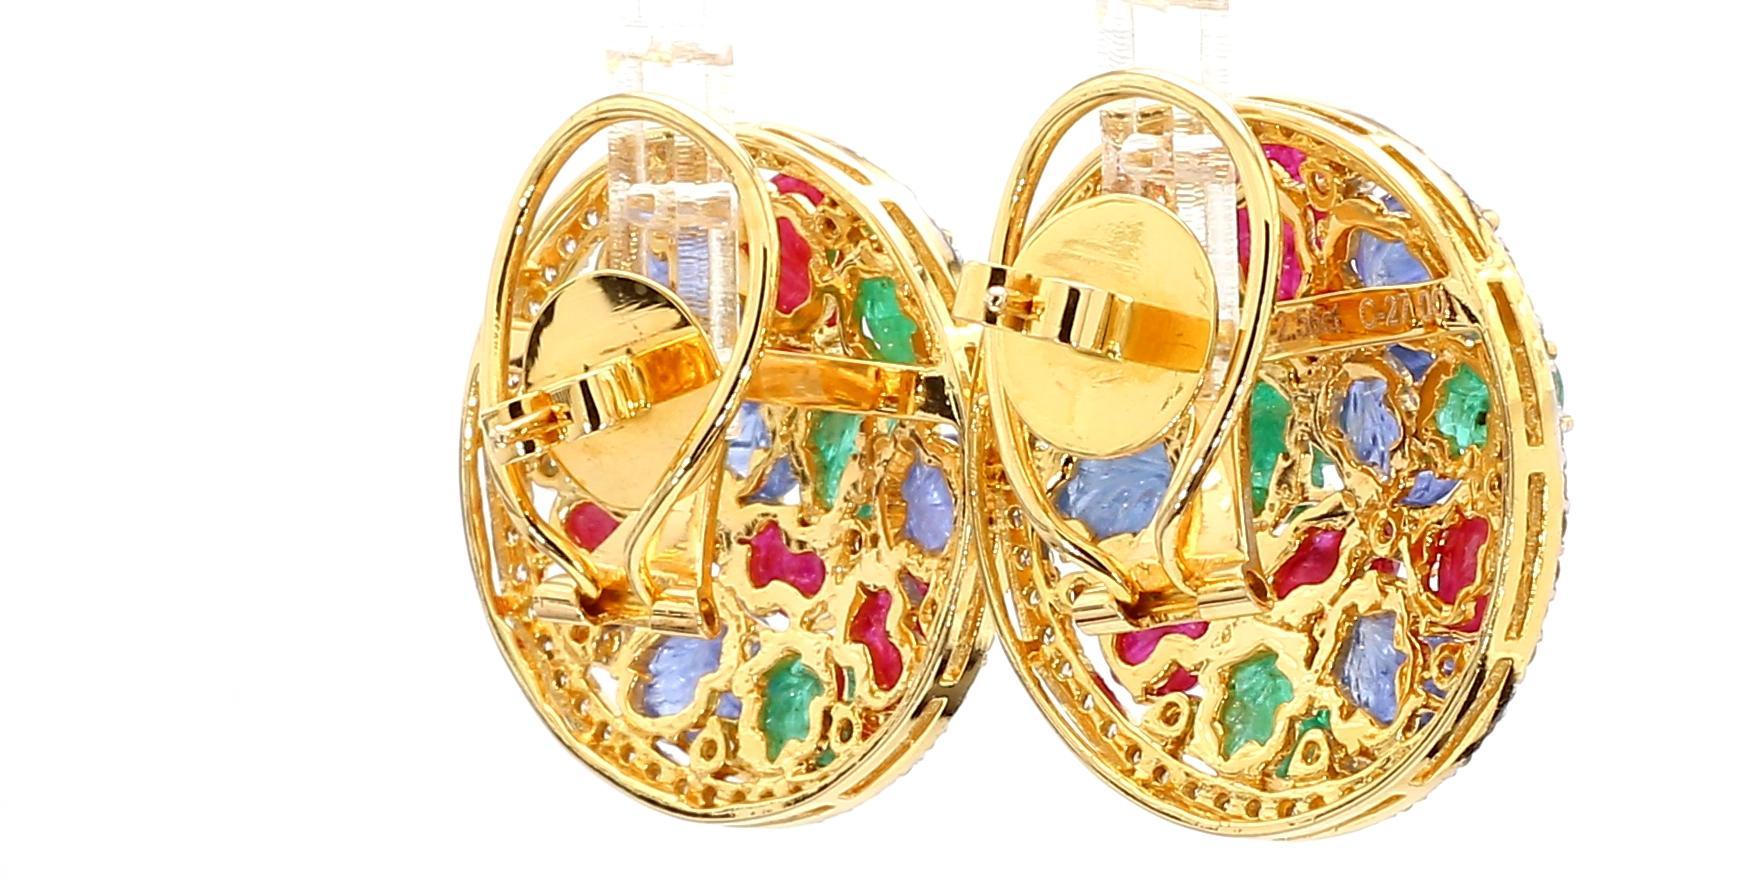 7 Carat Sapphire, Emerald, Ruby and 5 Carat Diamond 18K Gold Earrings For Sale 1